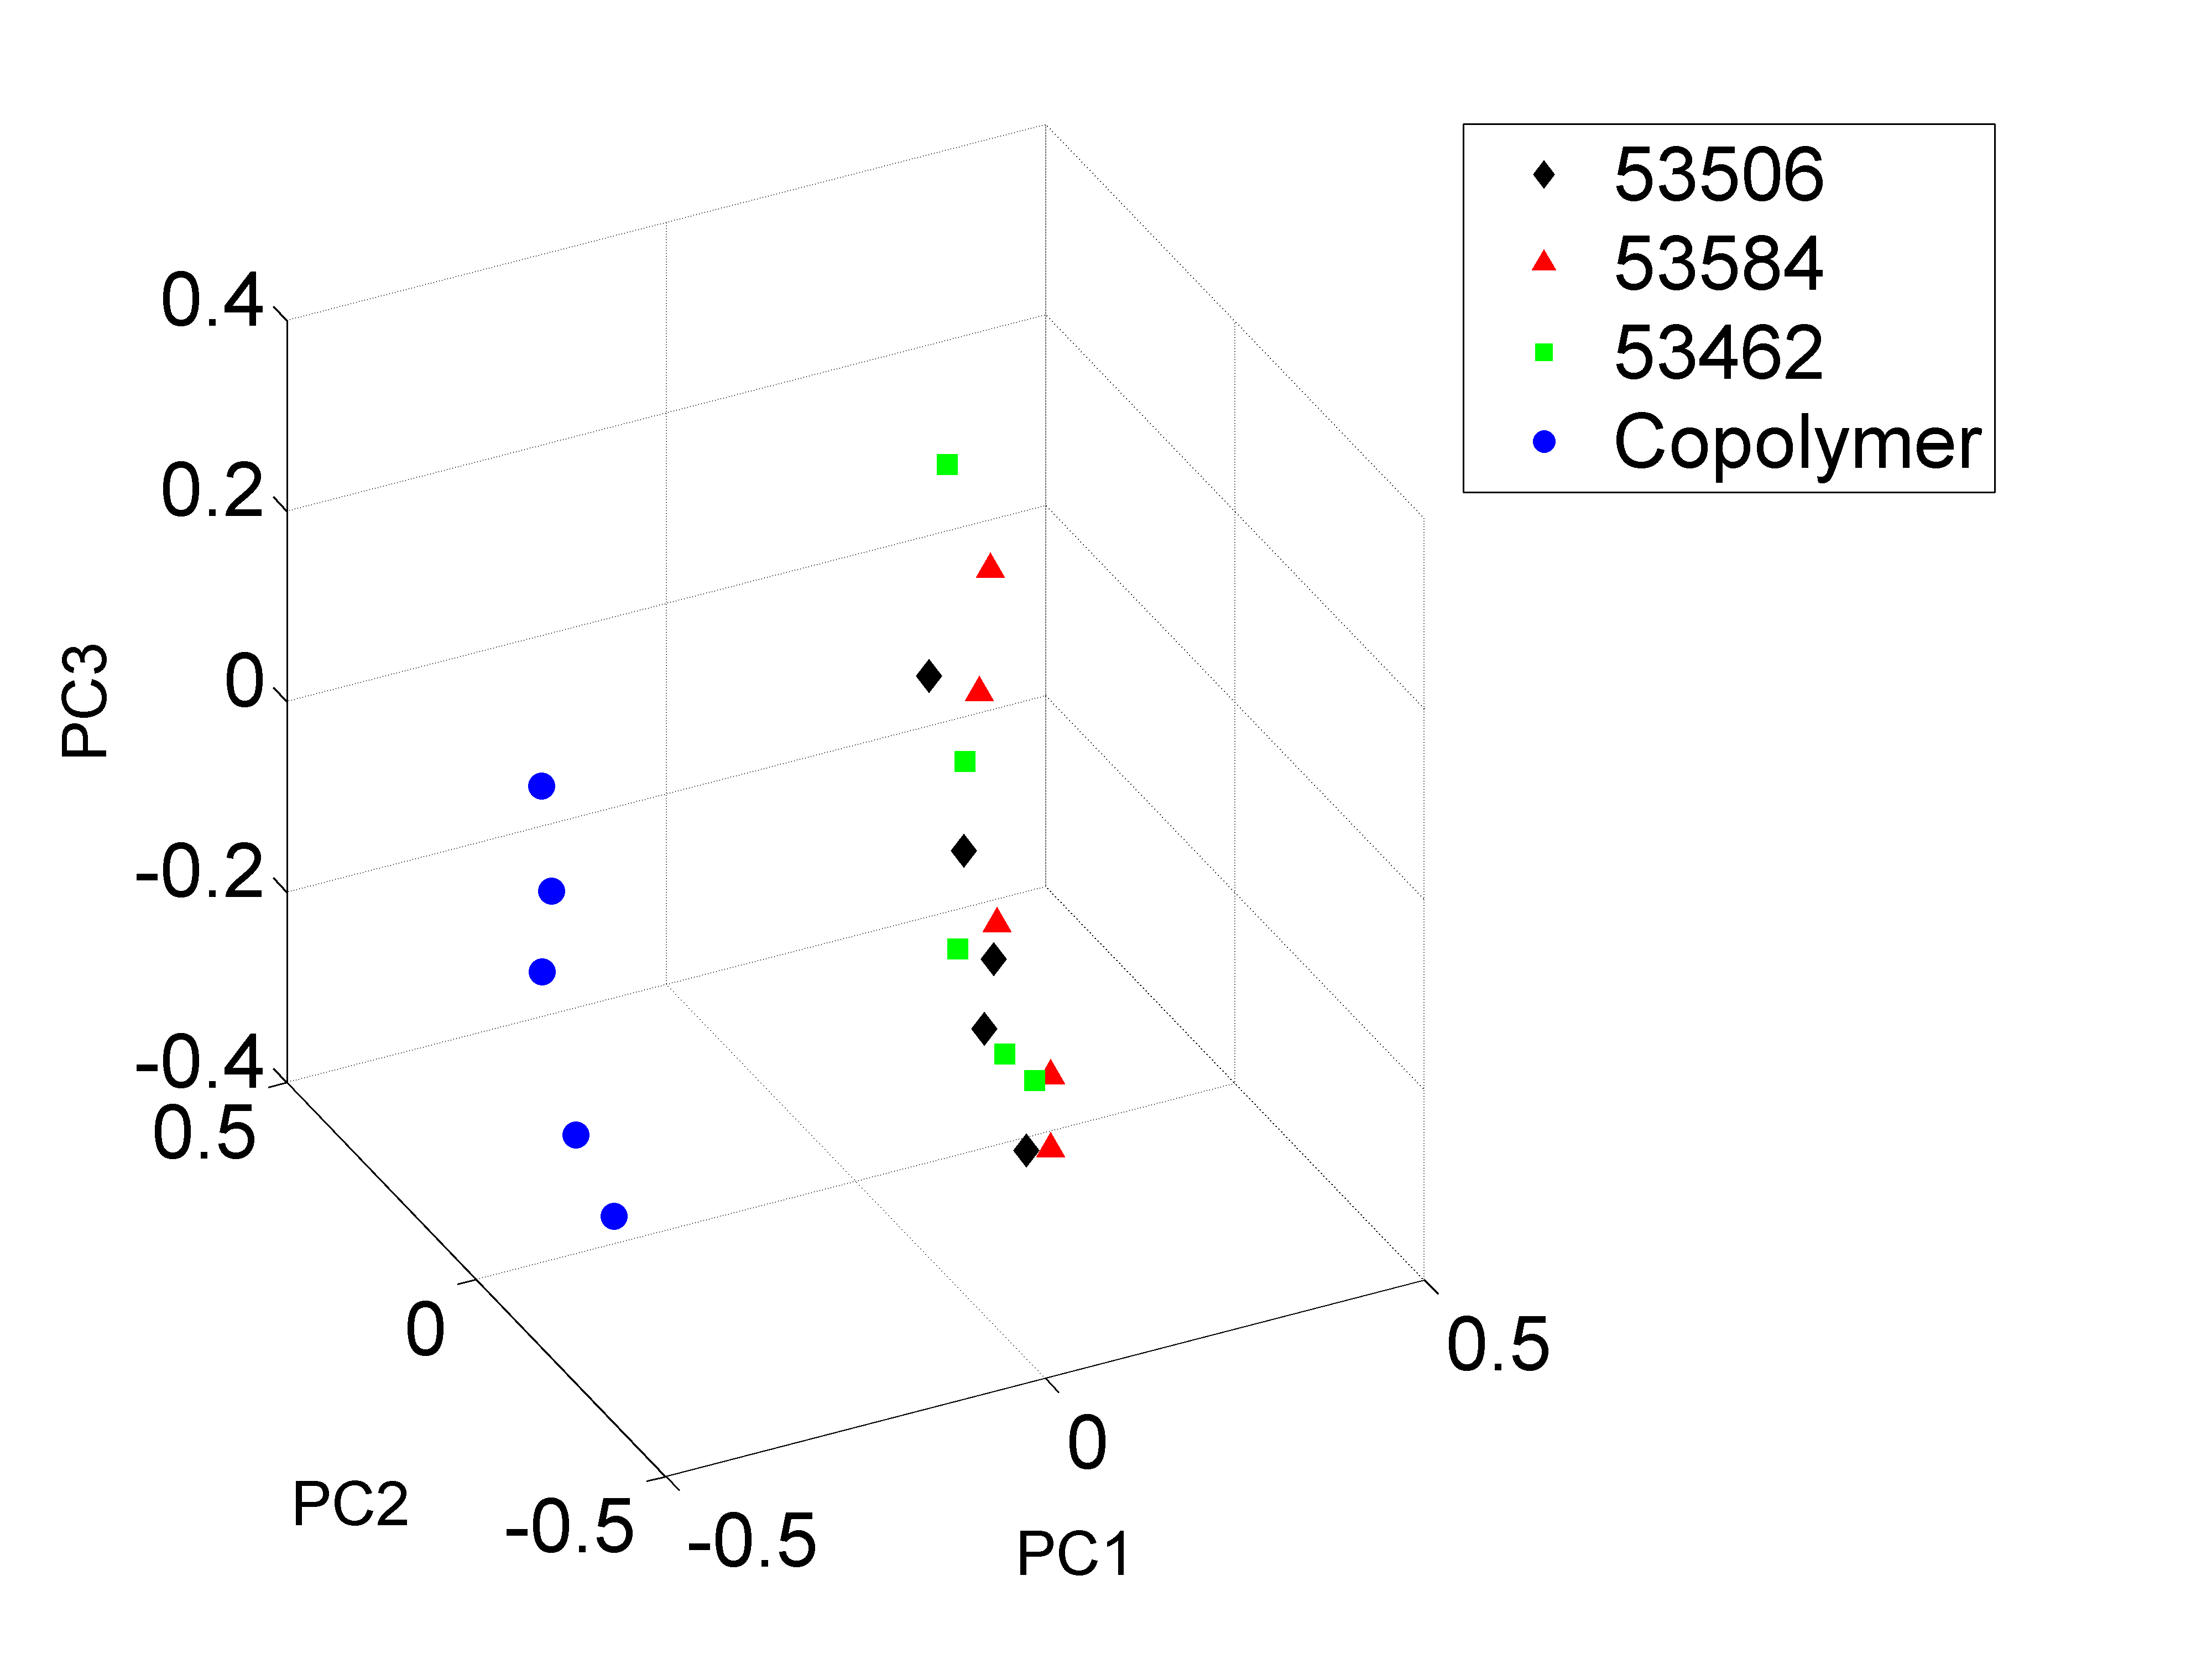 Figure 6. 3-D plot of all data points (three Teva lots and copolymer-1) in the constructed space by the first three principal components (which retain major variability/information of original data) a